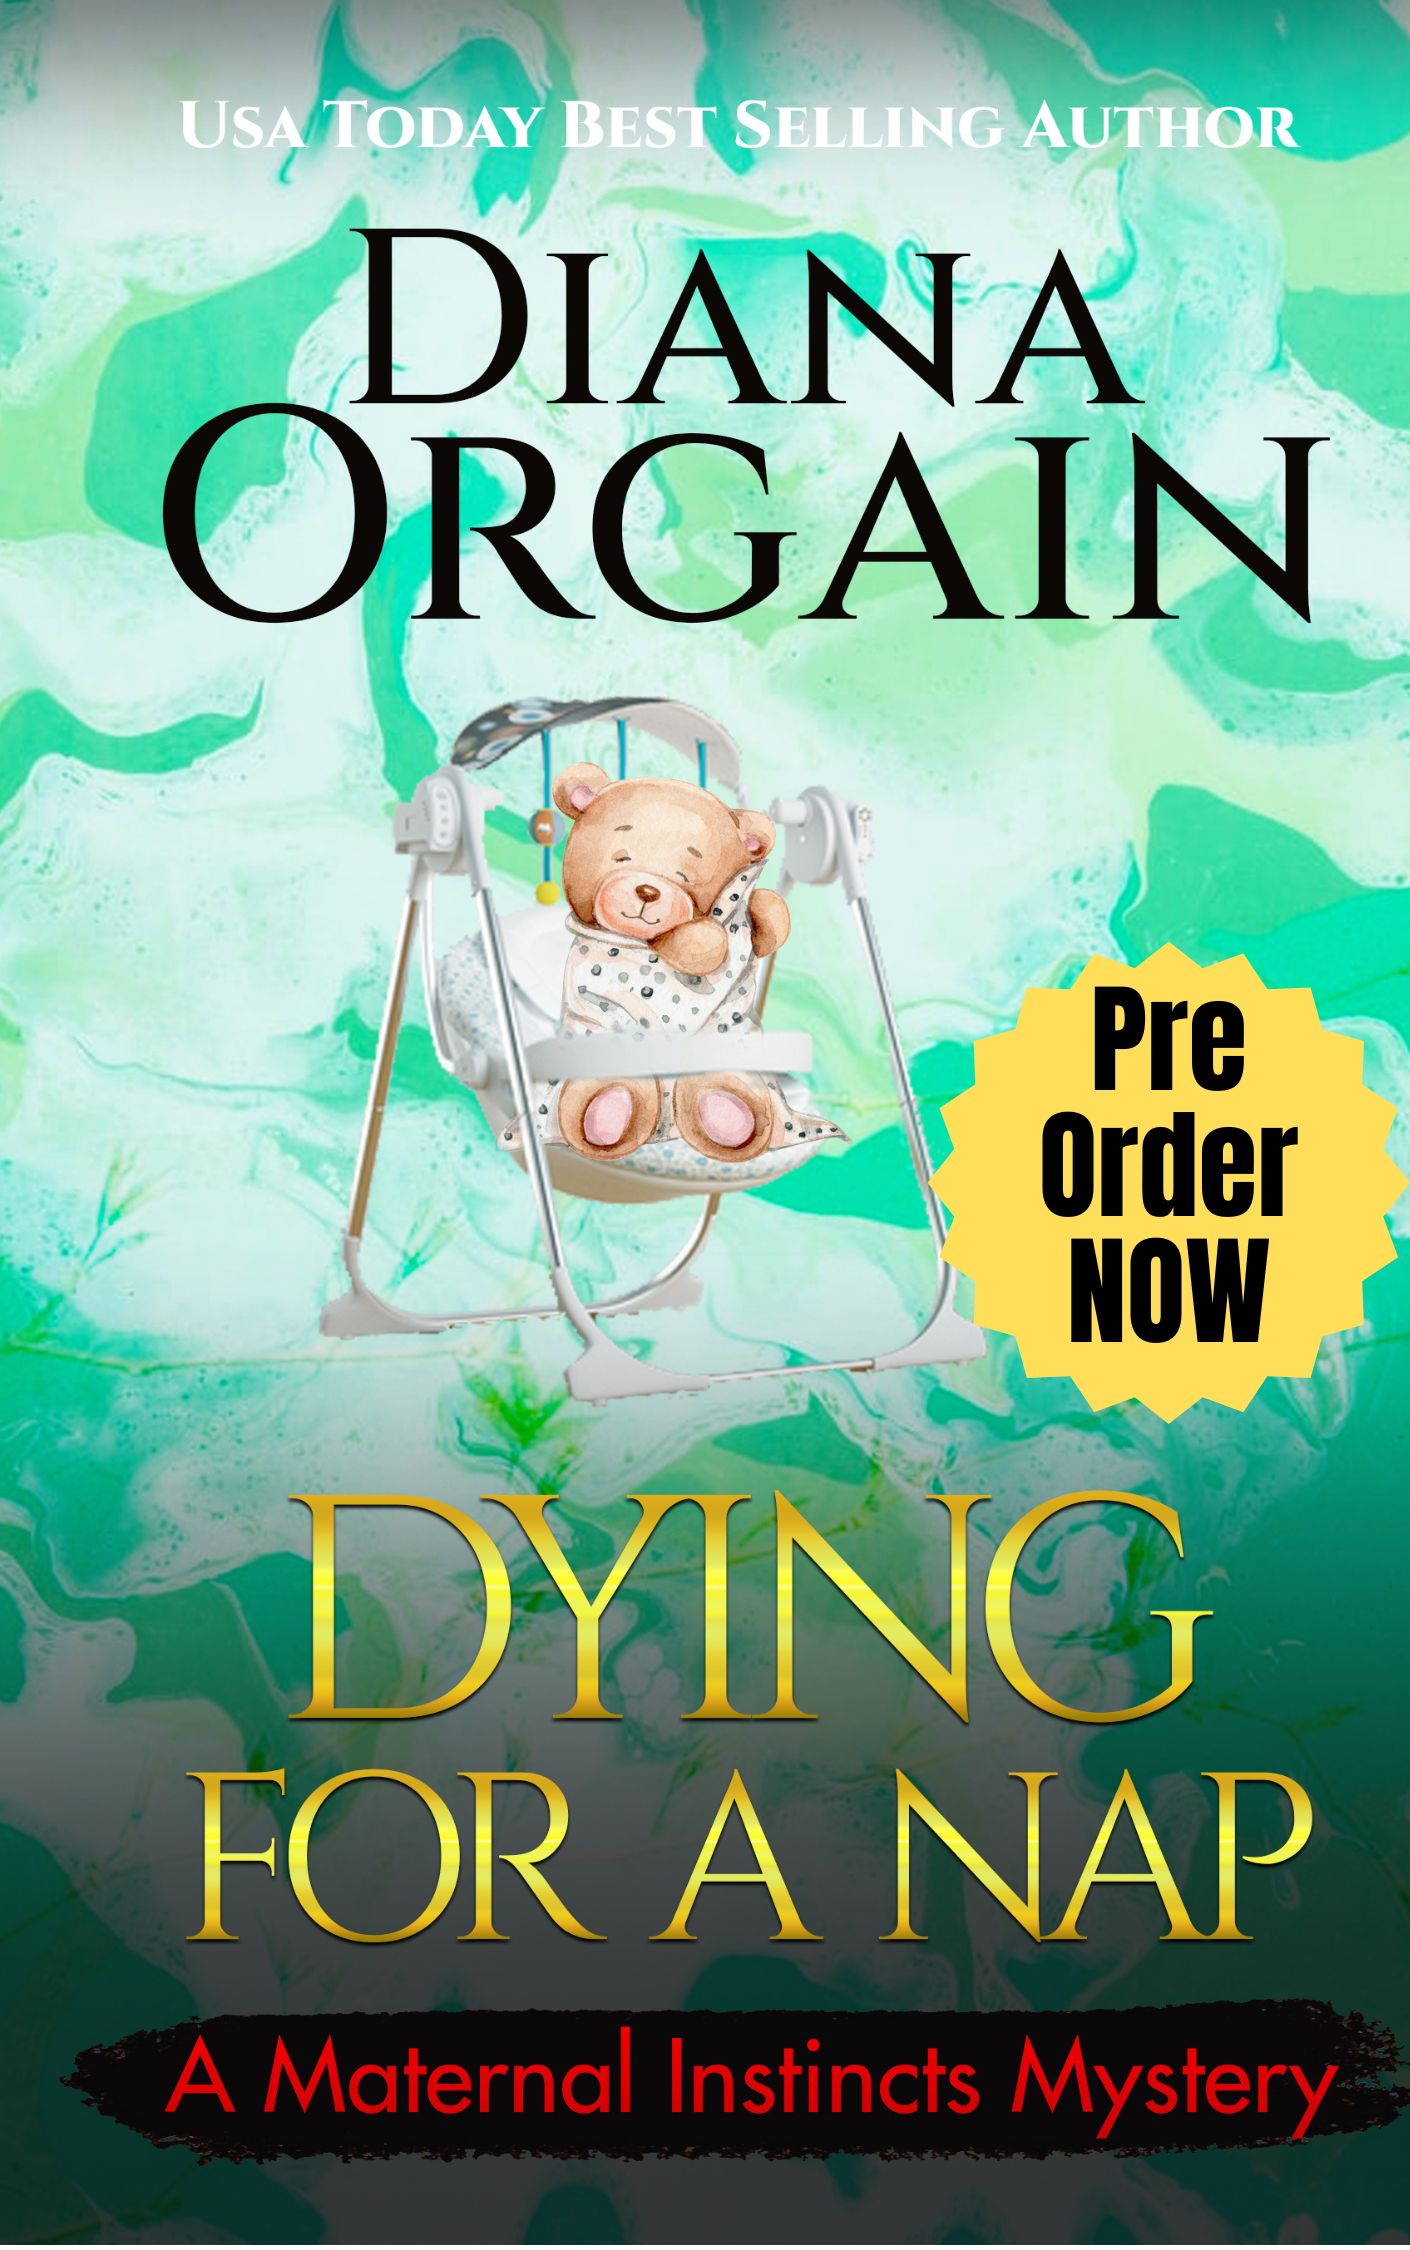 Dying for a Nap E-BOOK (Book 14 in the Maternal Instincts Mysteries)